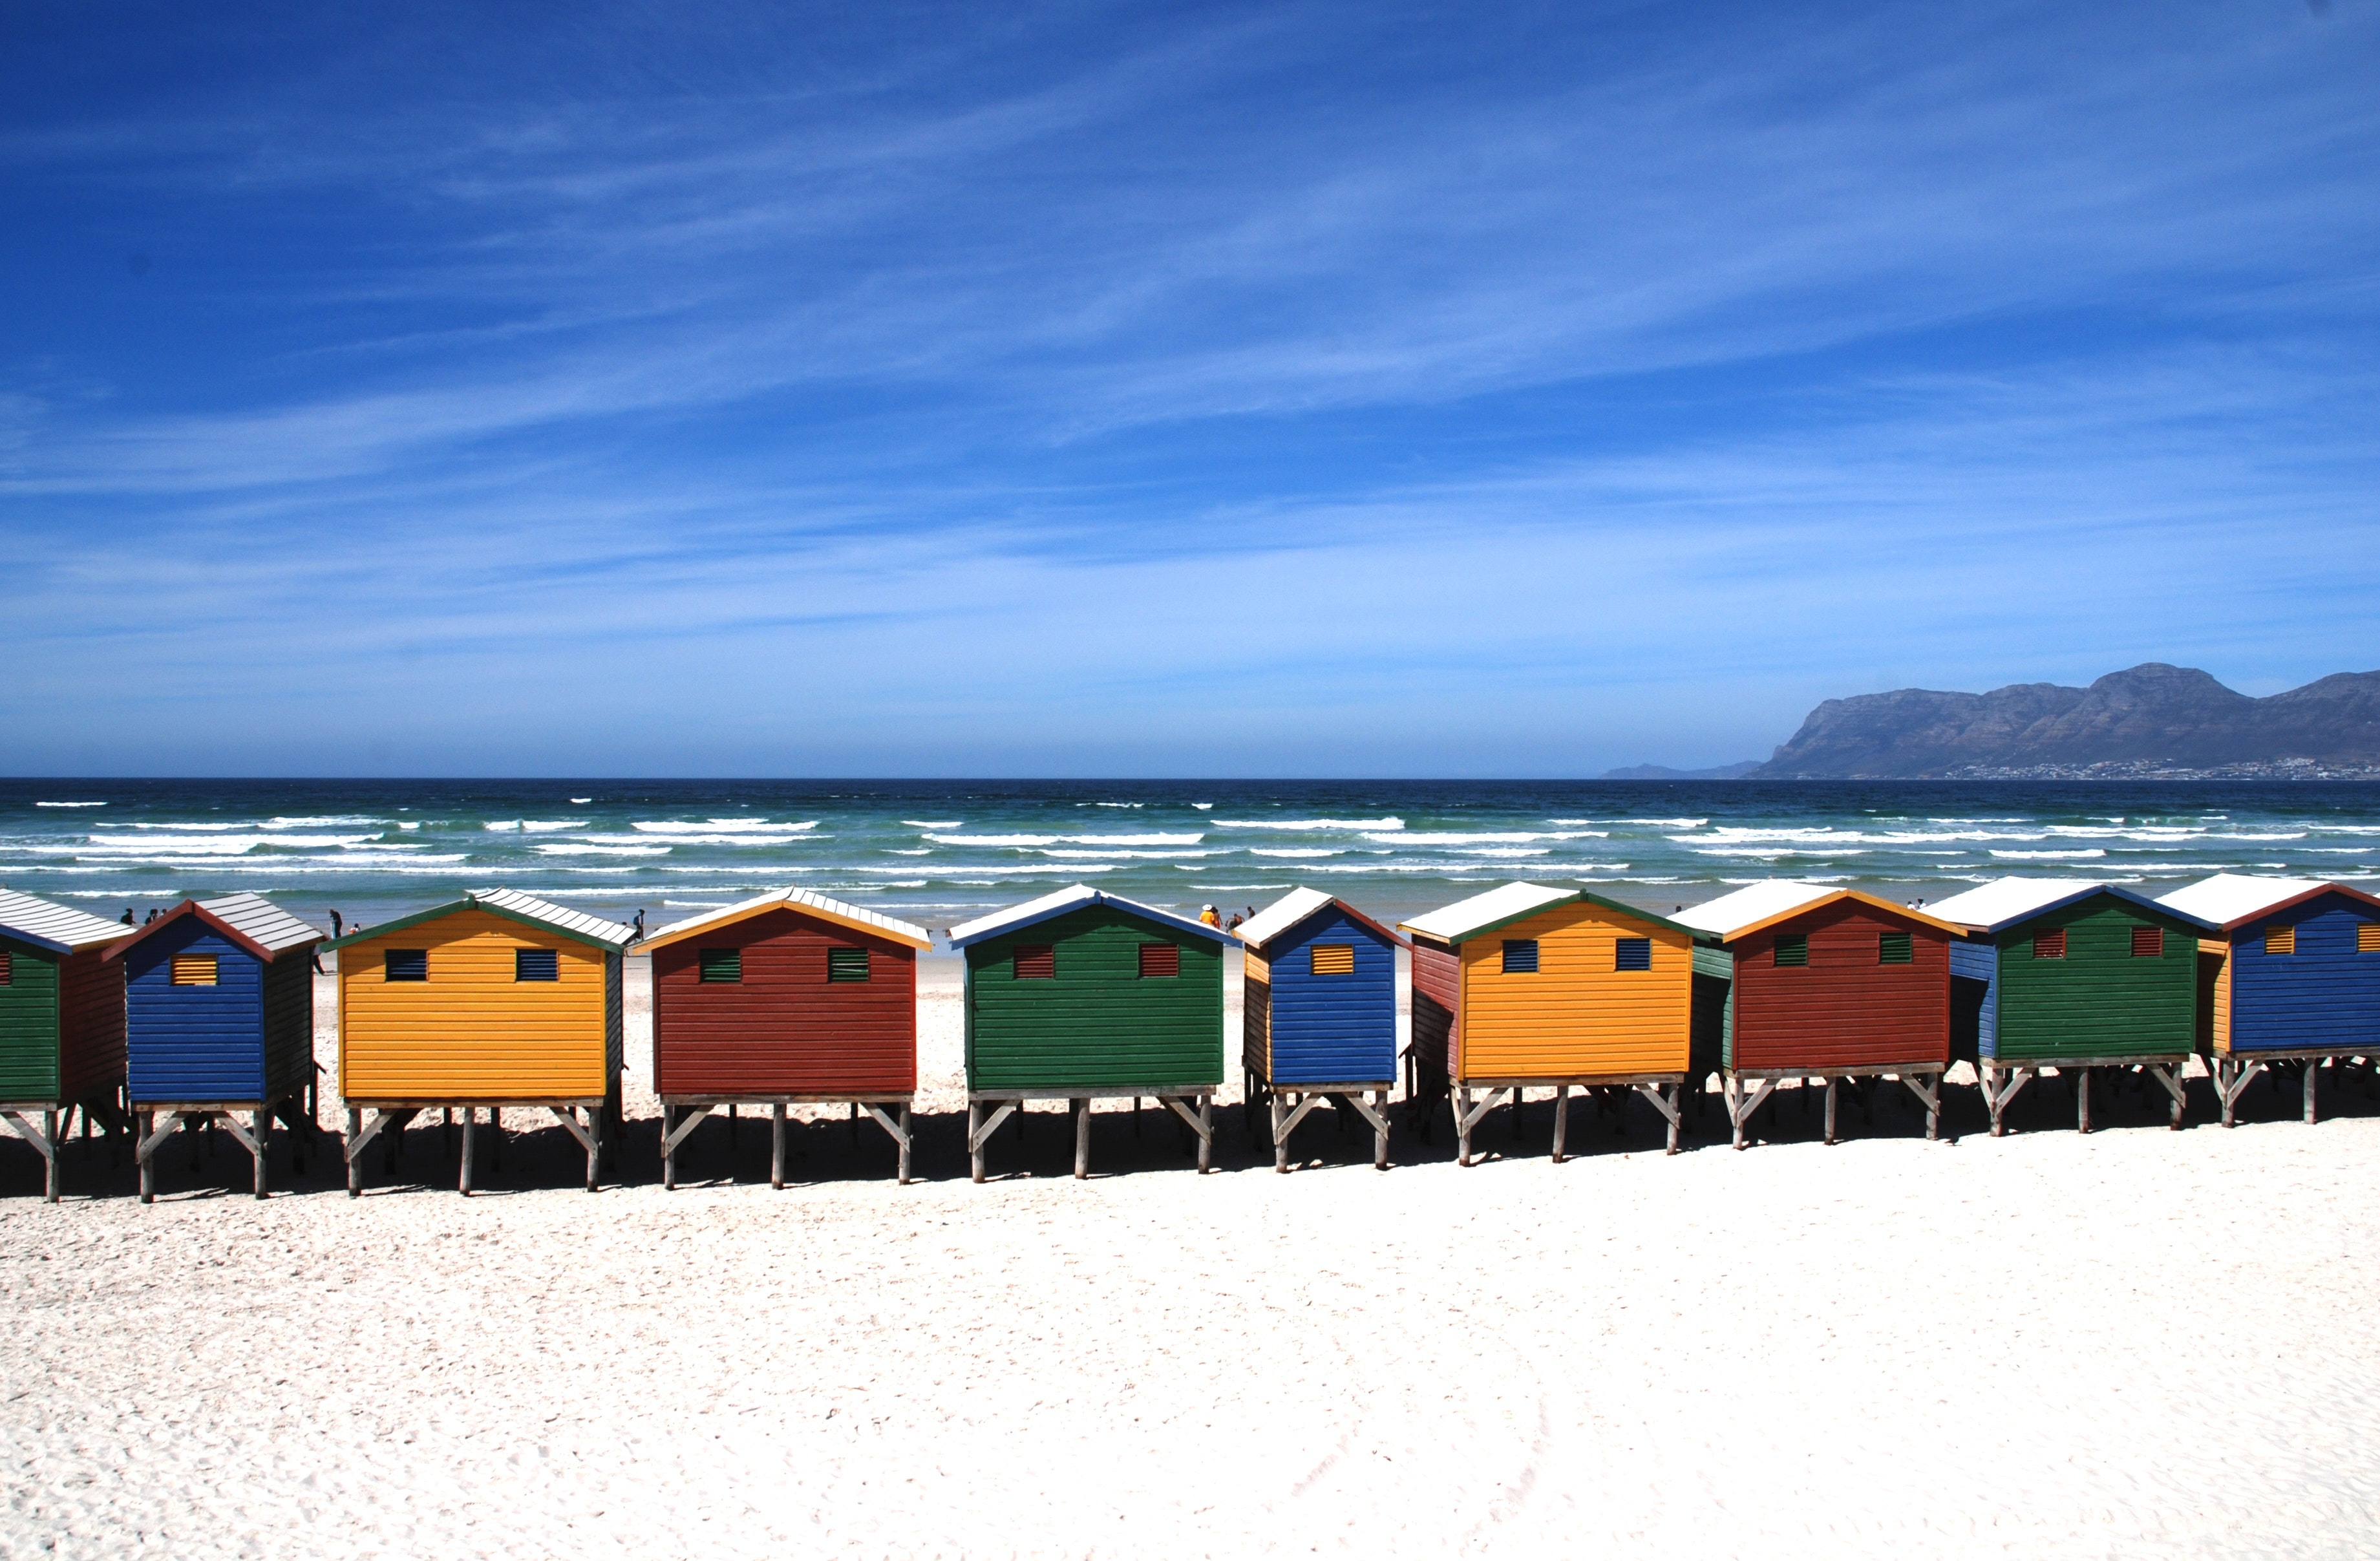 Colorful cottages near the sea under blue sky during daytime photo